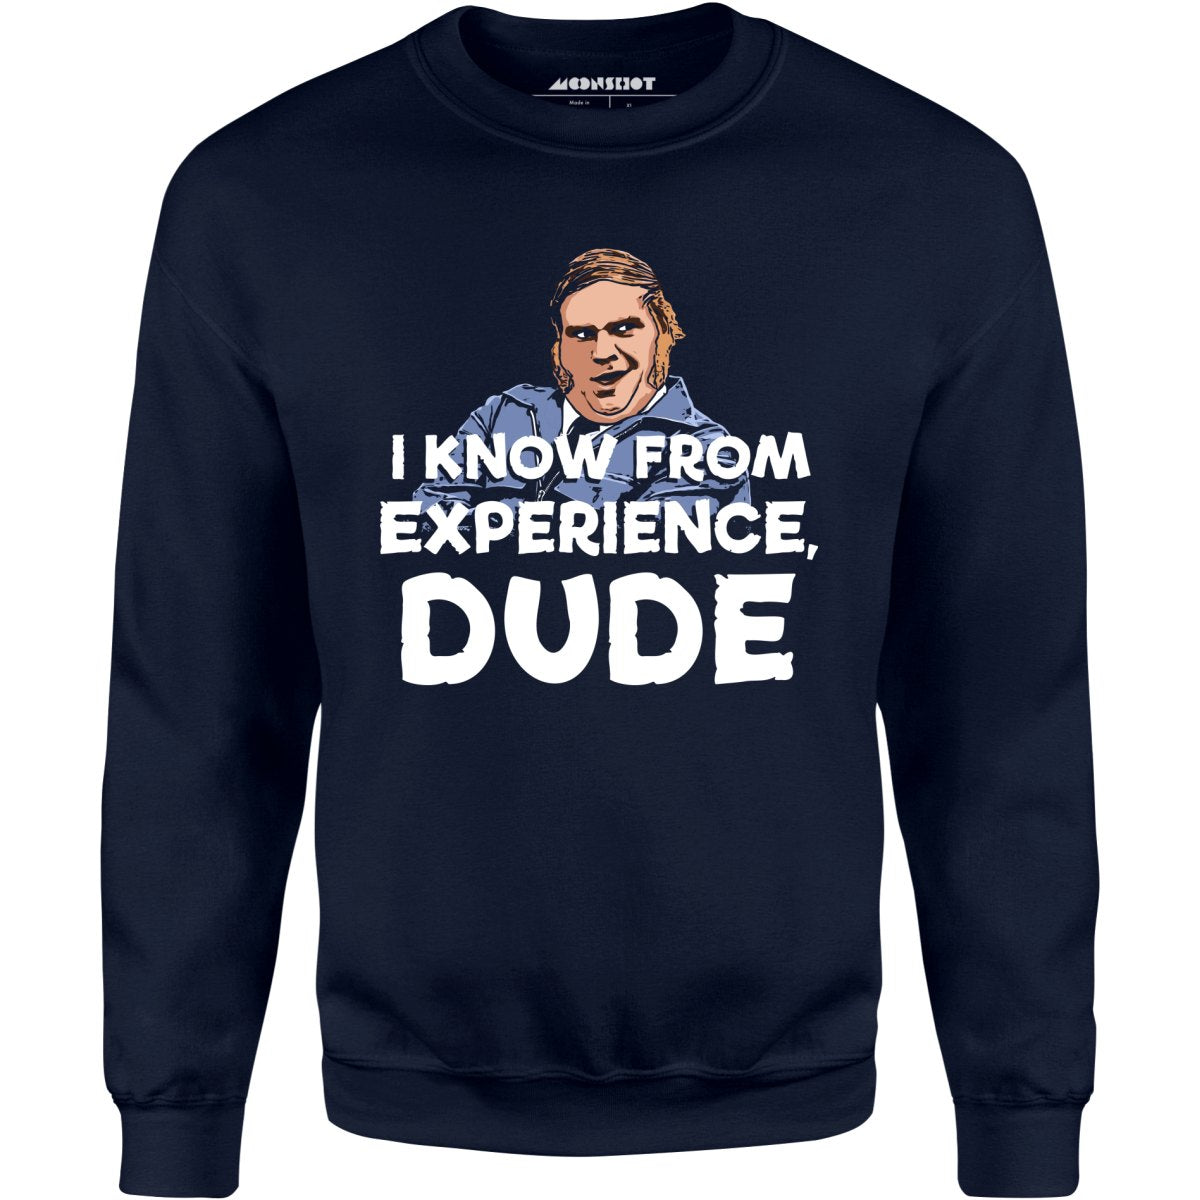 I Know From Experience, Dude - Unisex Sweatshirt